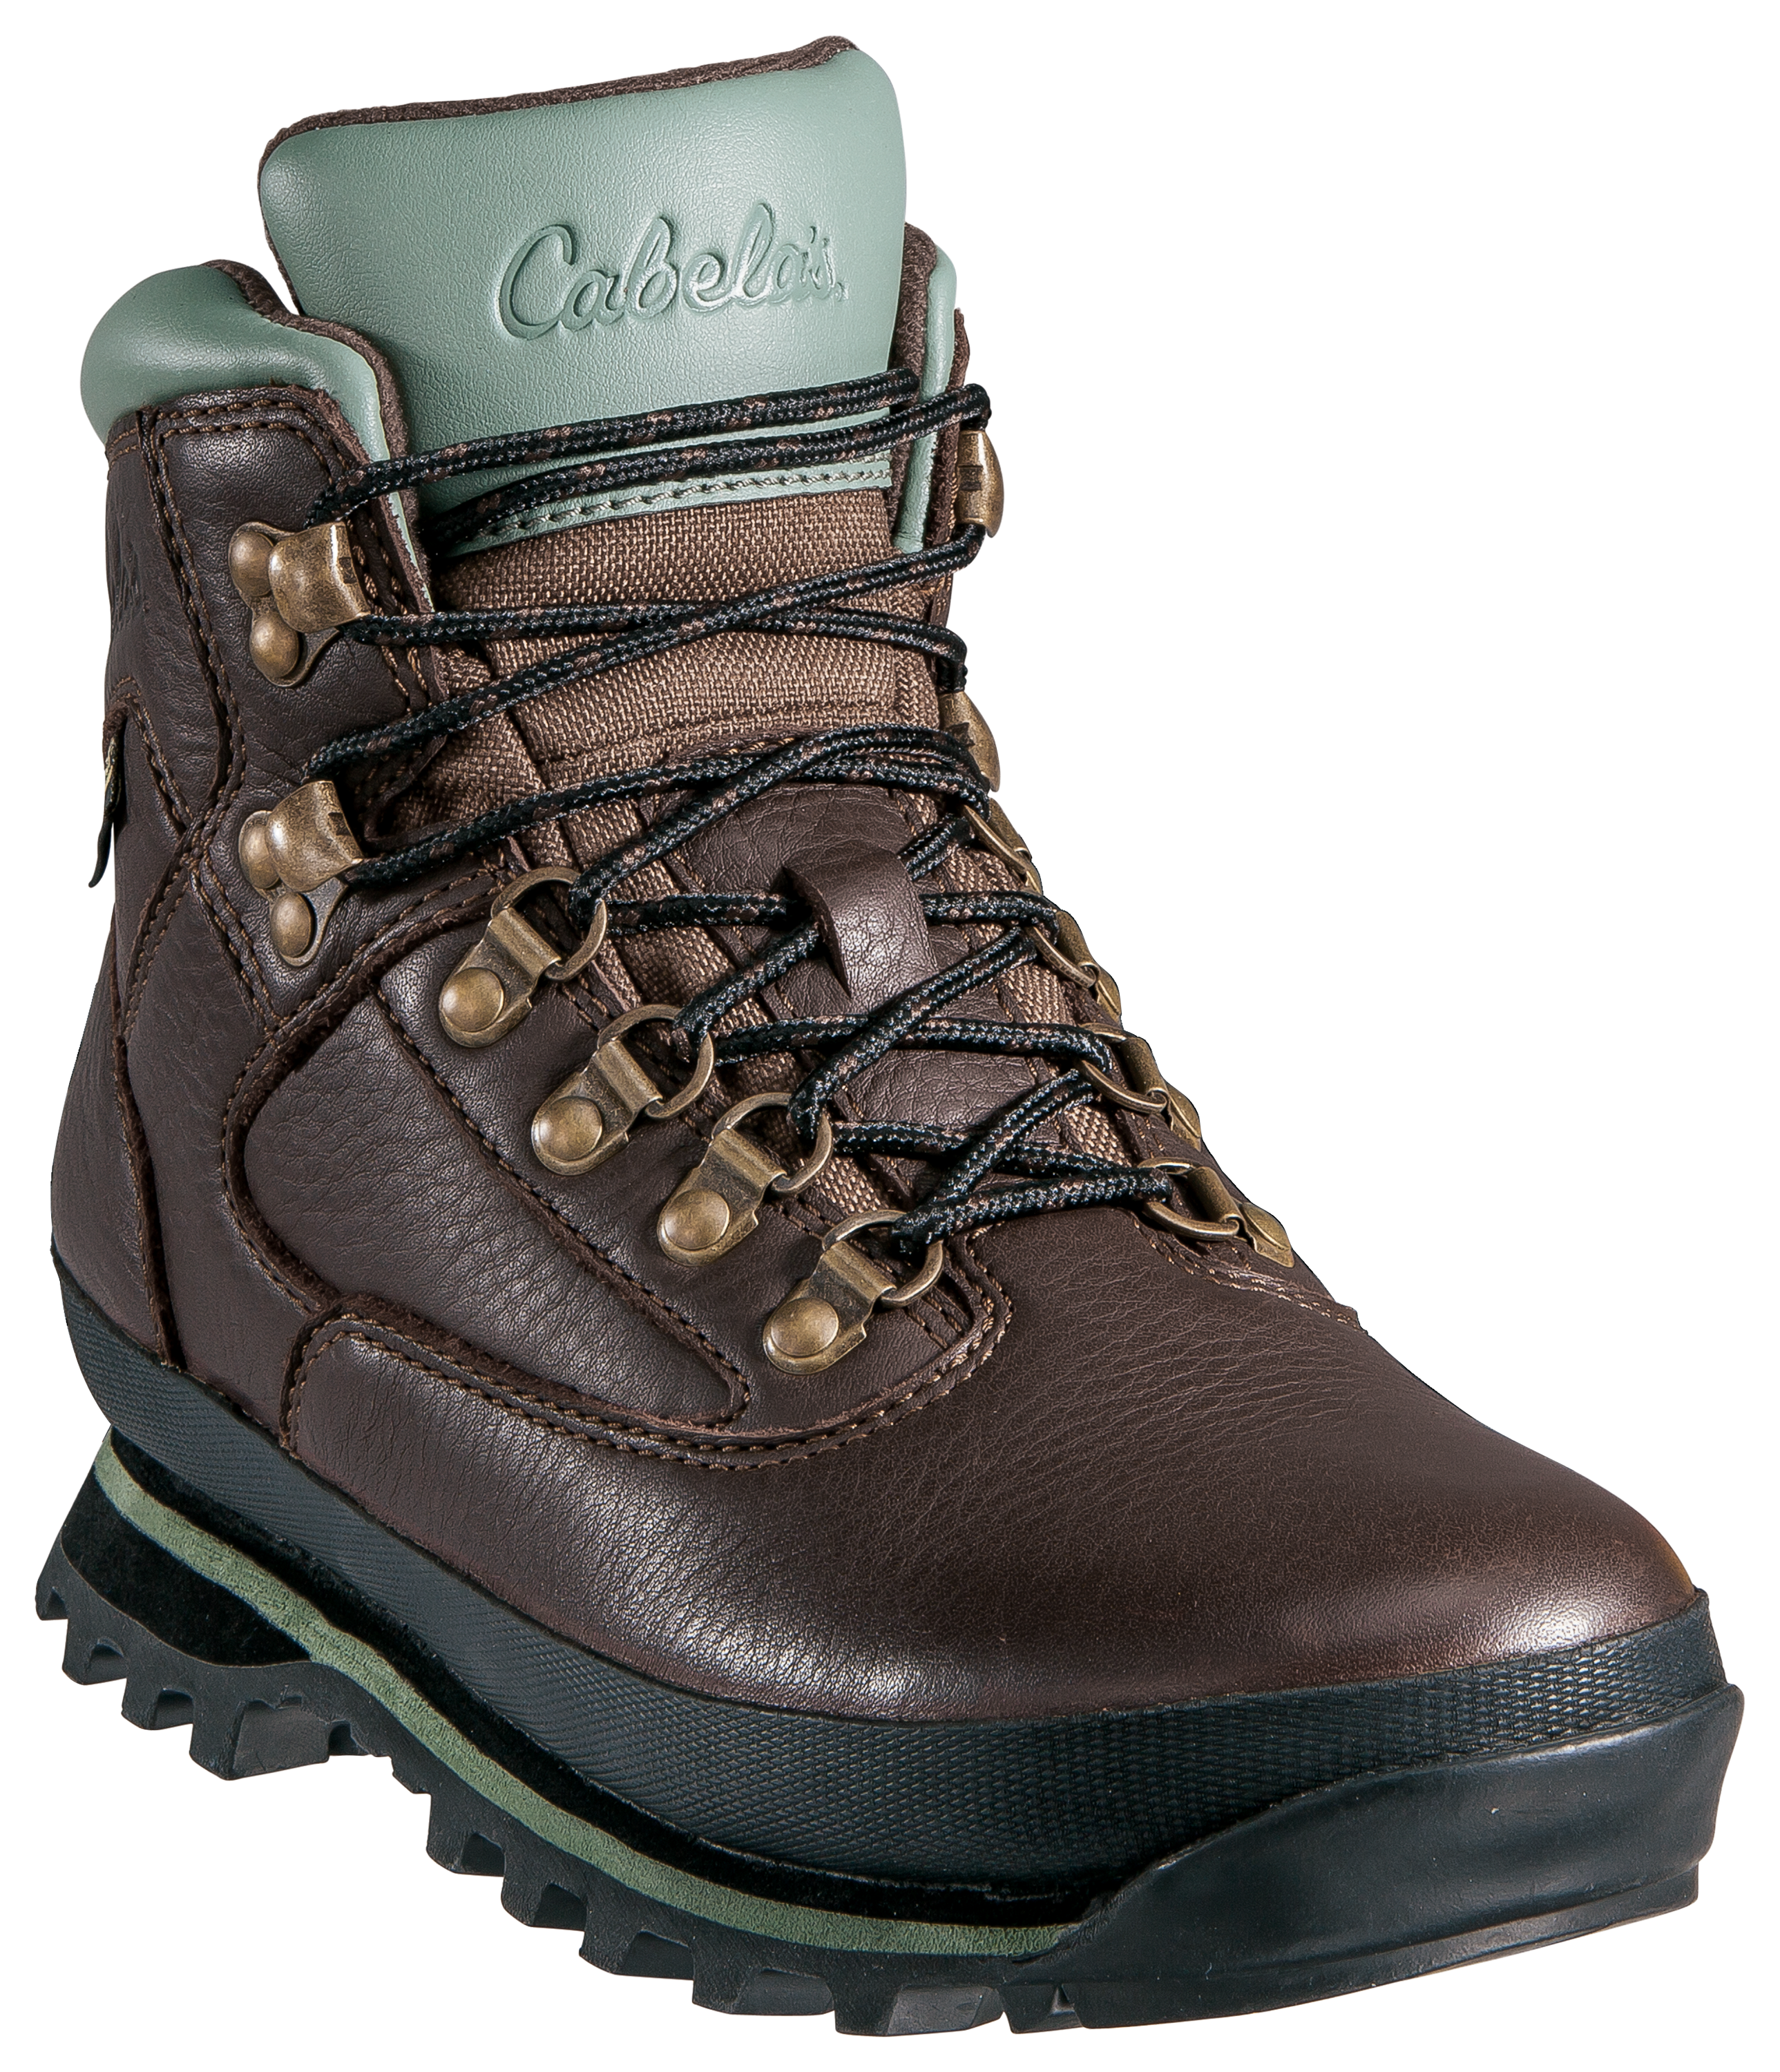 Cabela's Rimrock Mid GORE-TEX Hiking Boots for Ladies - Brown - 10 M